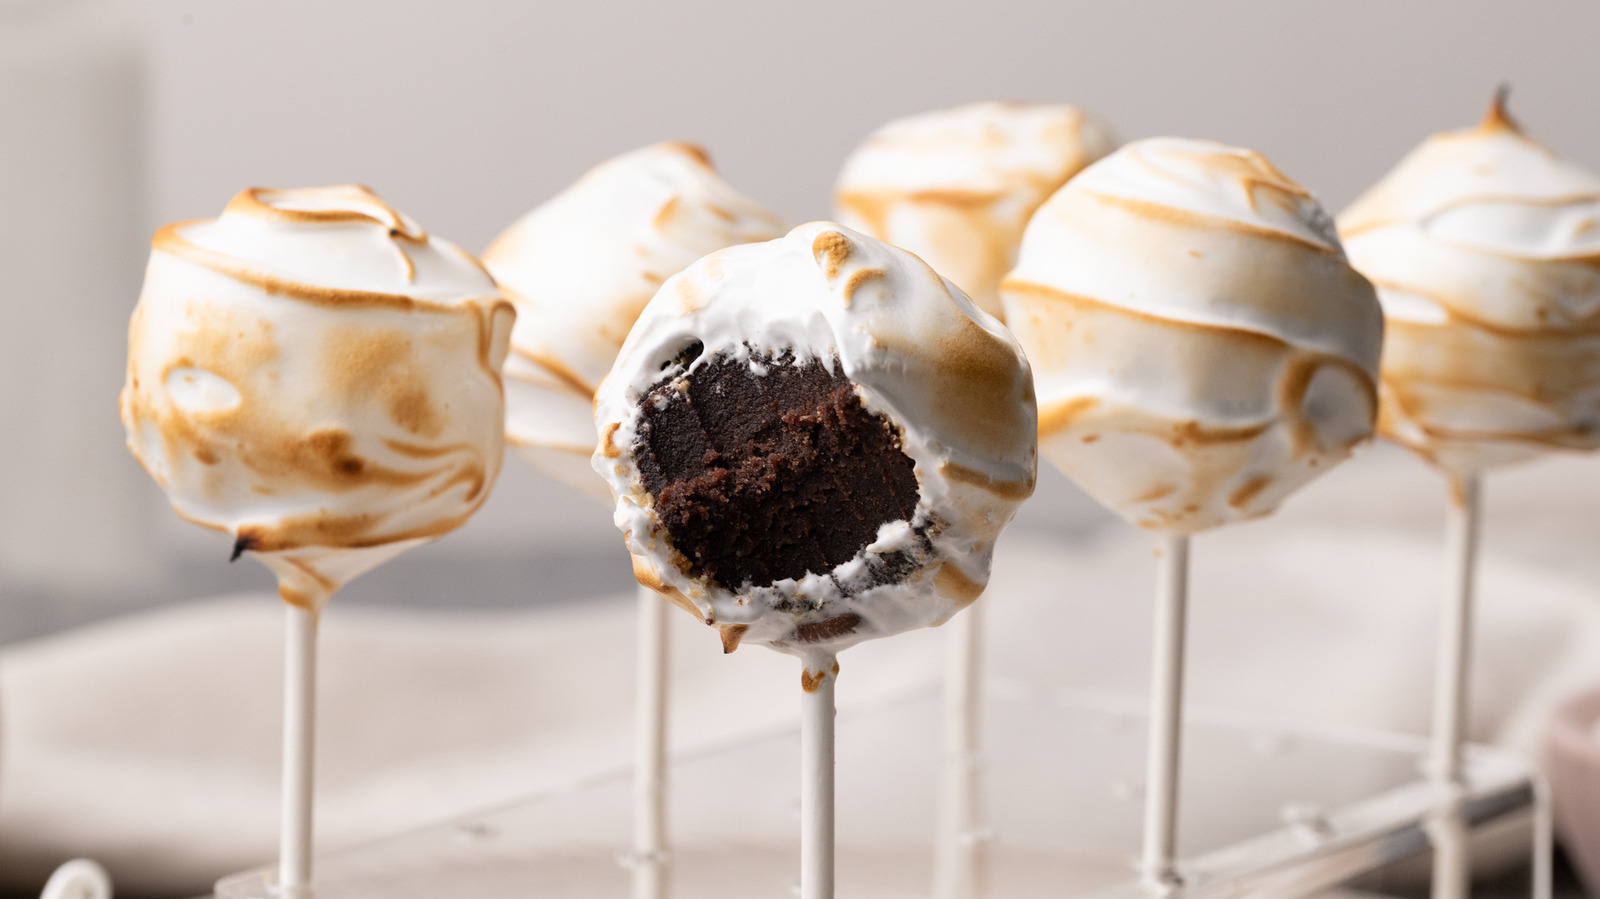 S'Mores Cakesicles Are a Fun Way to Enjoy This Classic Treat!